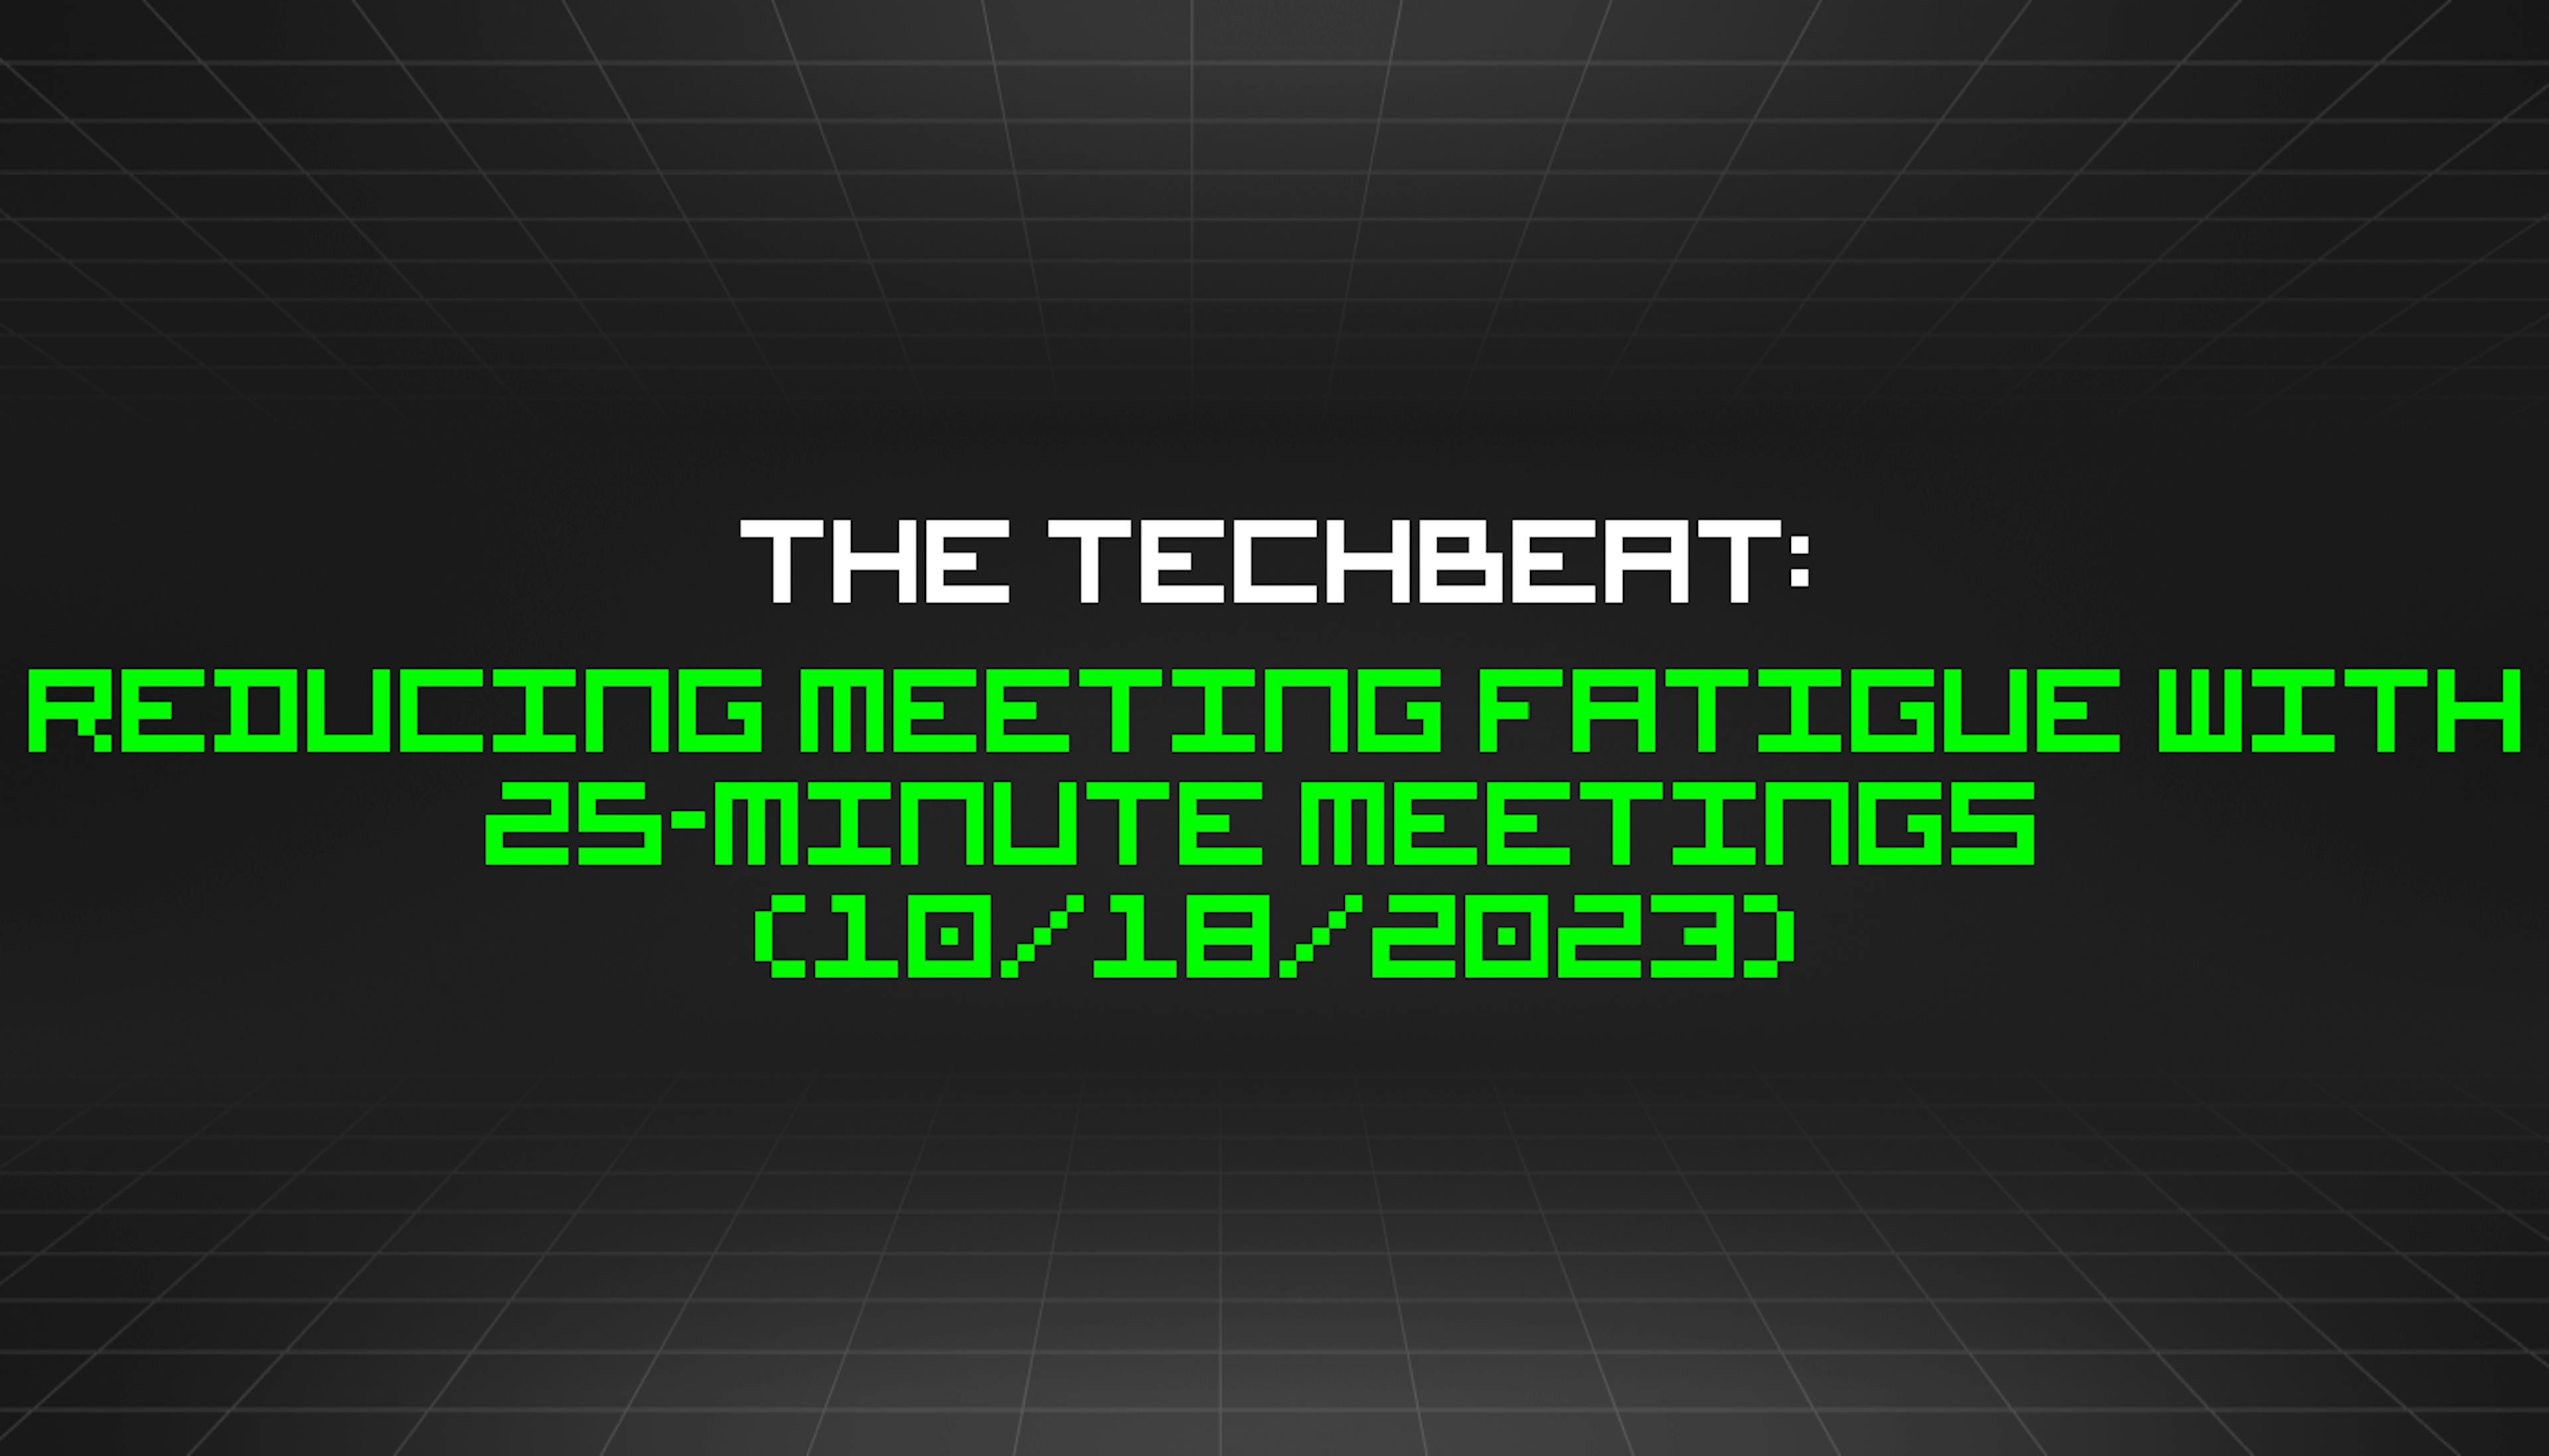 featured image - The TechBeat: Reducing Meeting Fatigue With 25-minute Meetings  (10/18/2023)